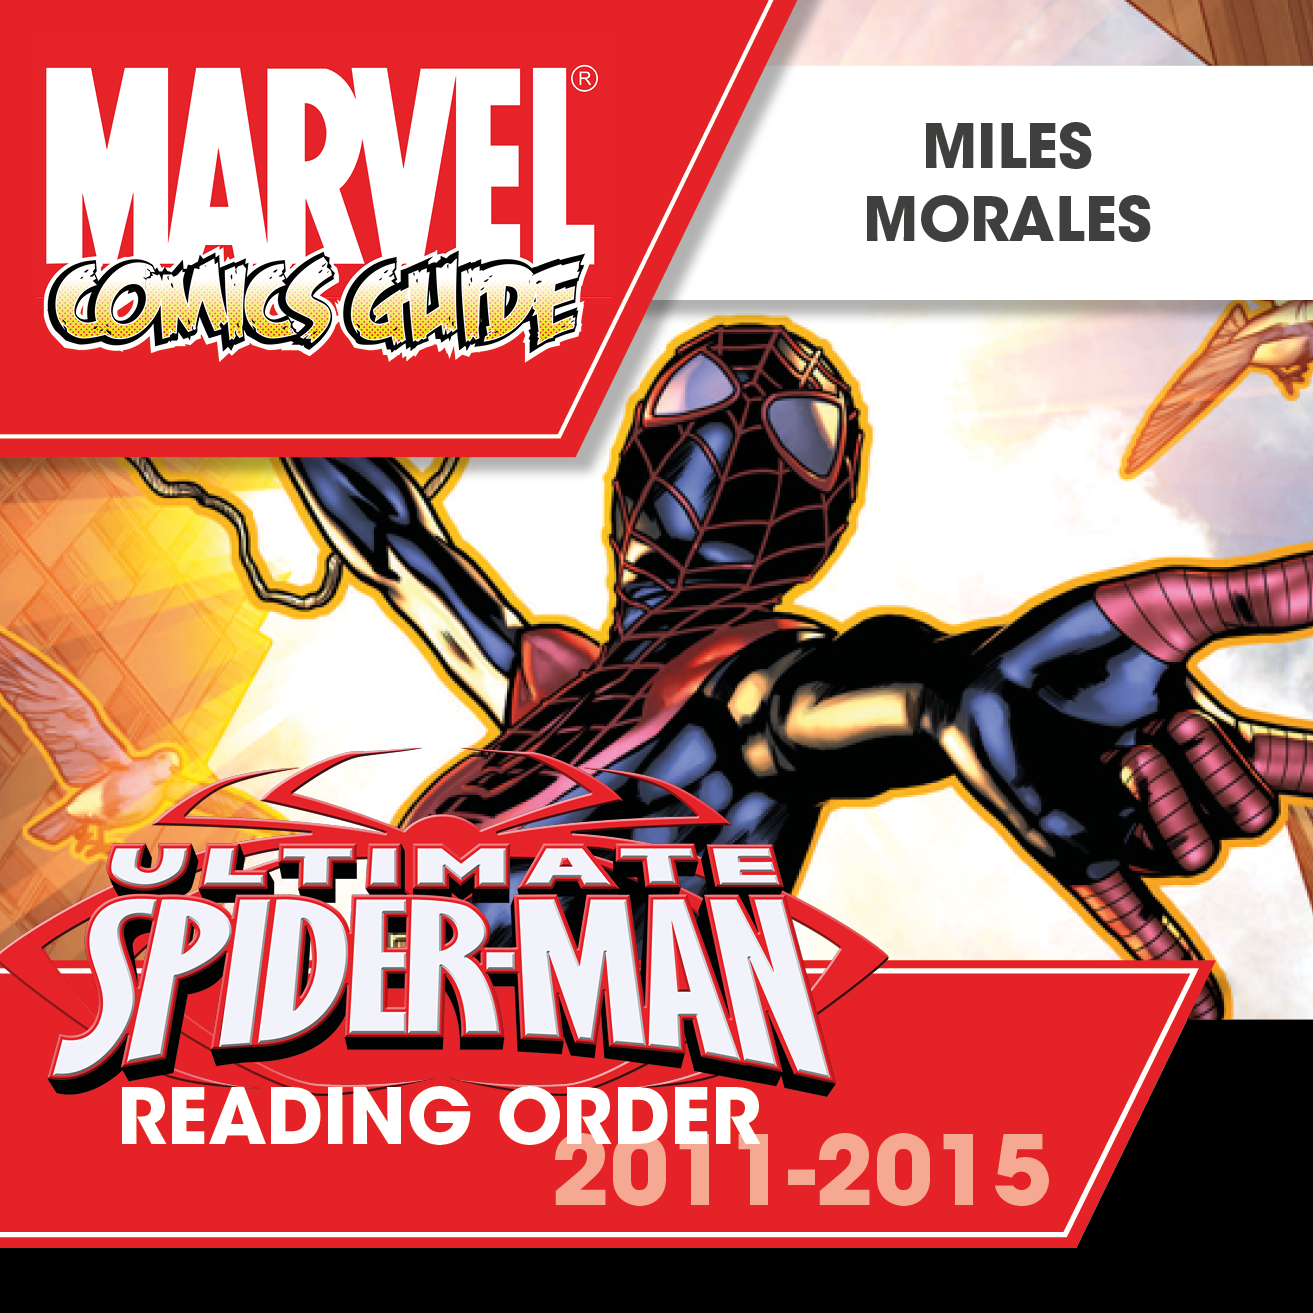 The Marvel Comics Guide: ULTIMATE SPIDER-MAN READING ORDER: Miles Morales  (2011-2015)